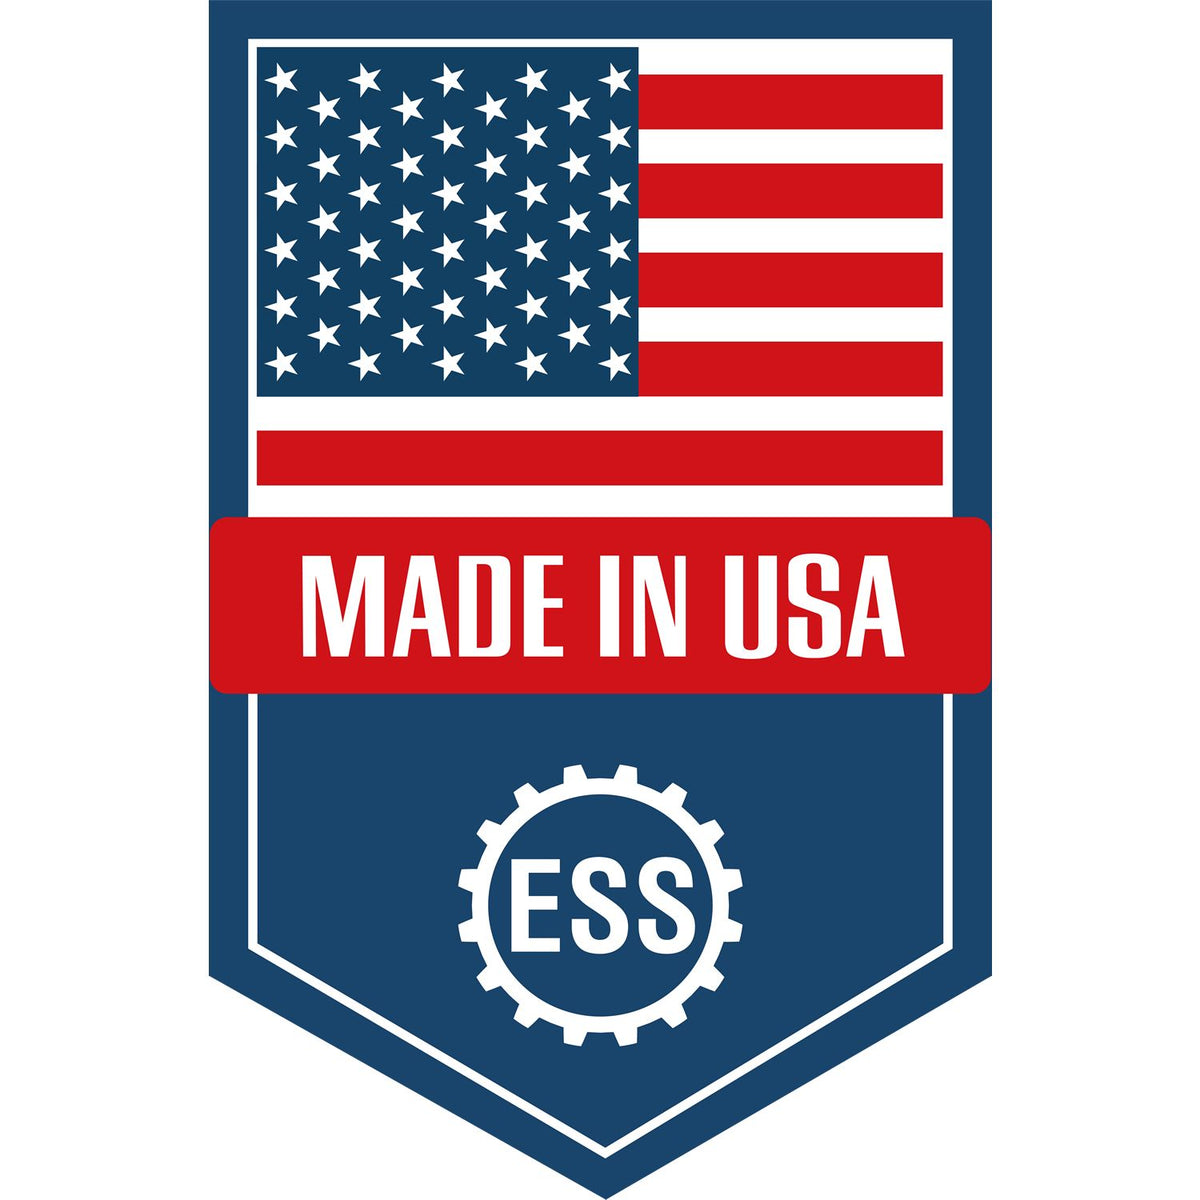 An icon or graphic with an american flag and text reading Made in USA for the Self-Inking Rectangular Missouri Notary Stamp